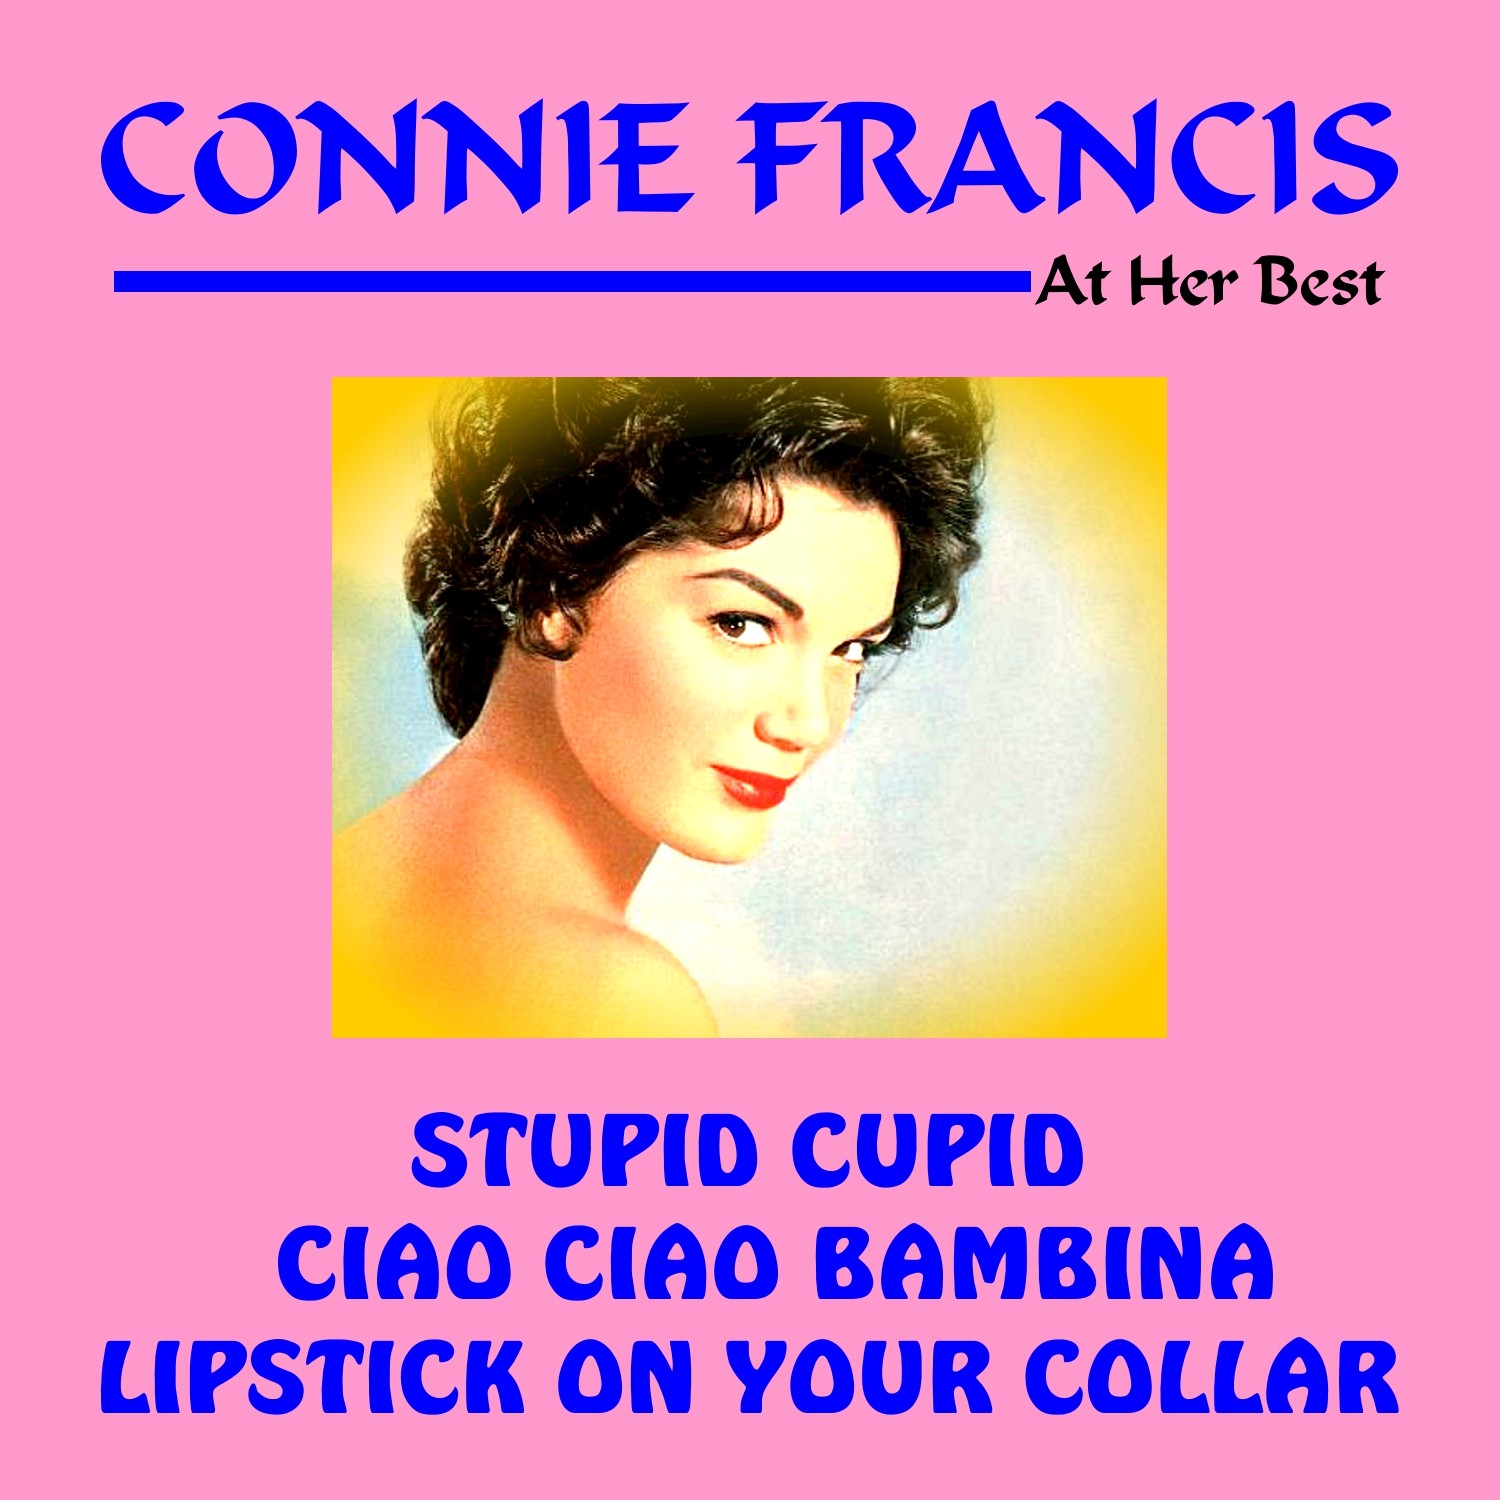 Connie Francis at Her Best